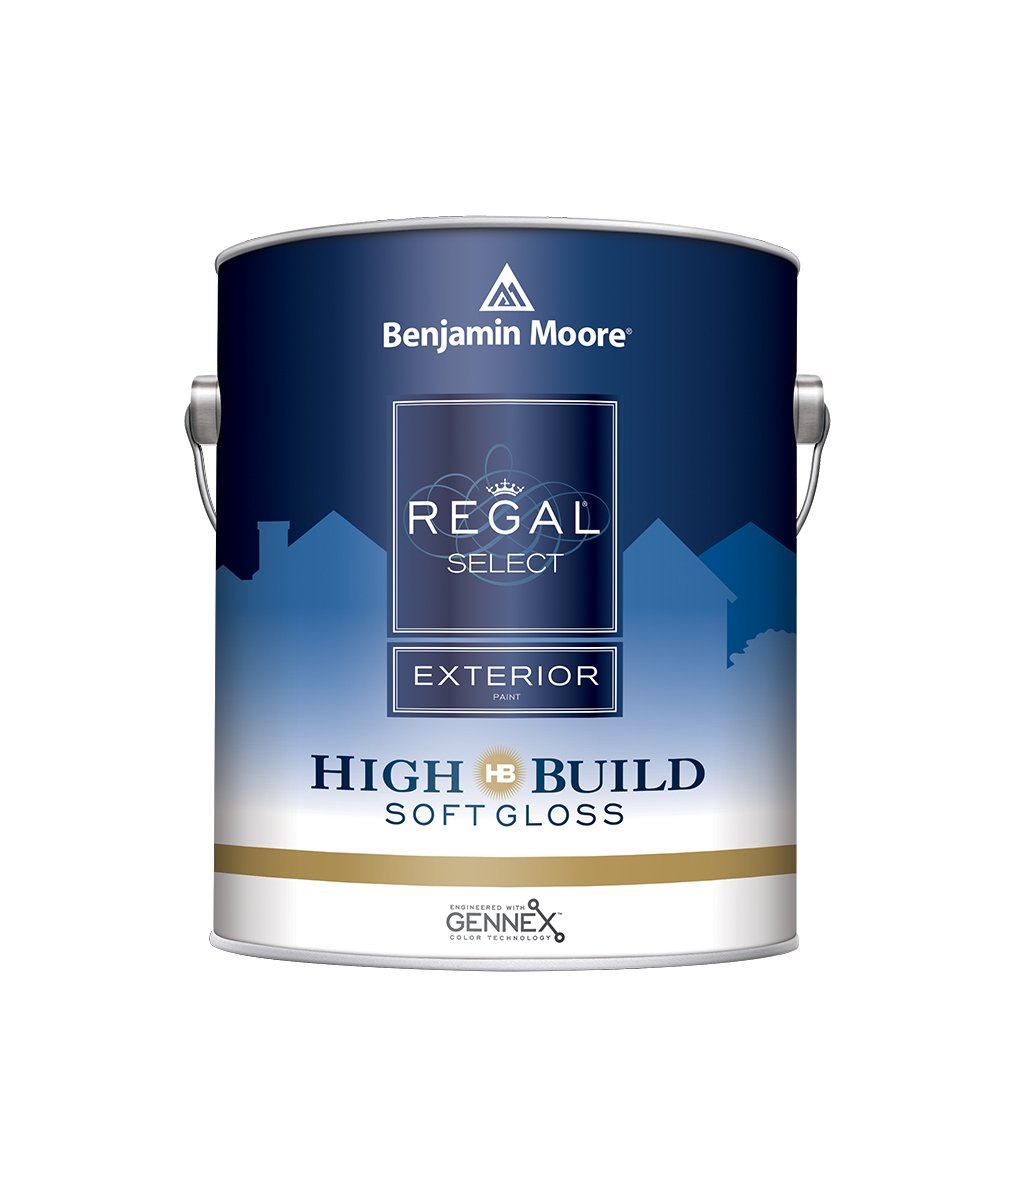 Benjamin Moore Regal Select Soft Gloss Exterior Paint Gallon, available at JC Licht.